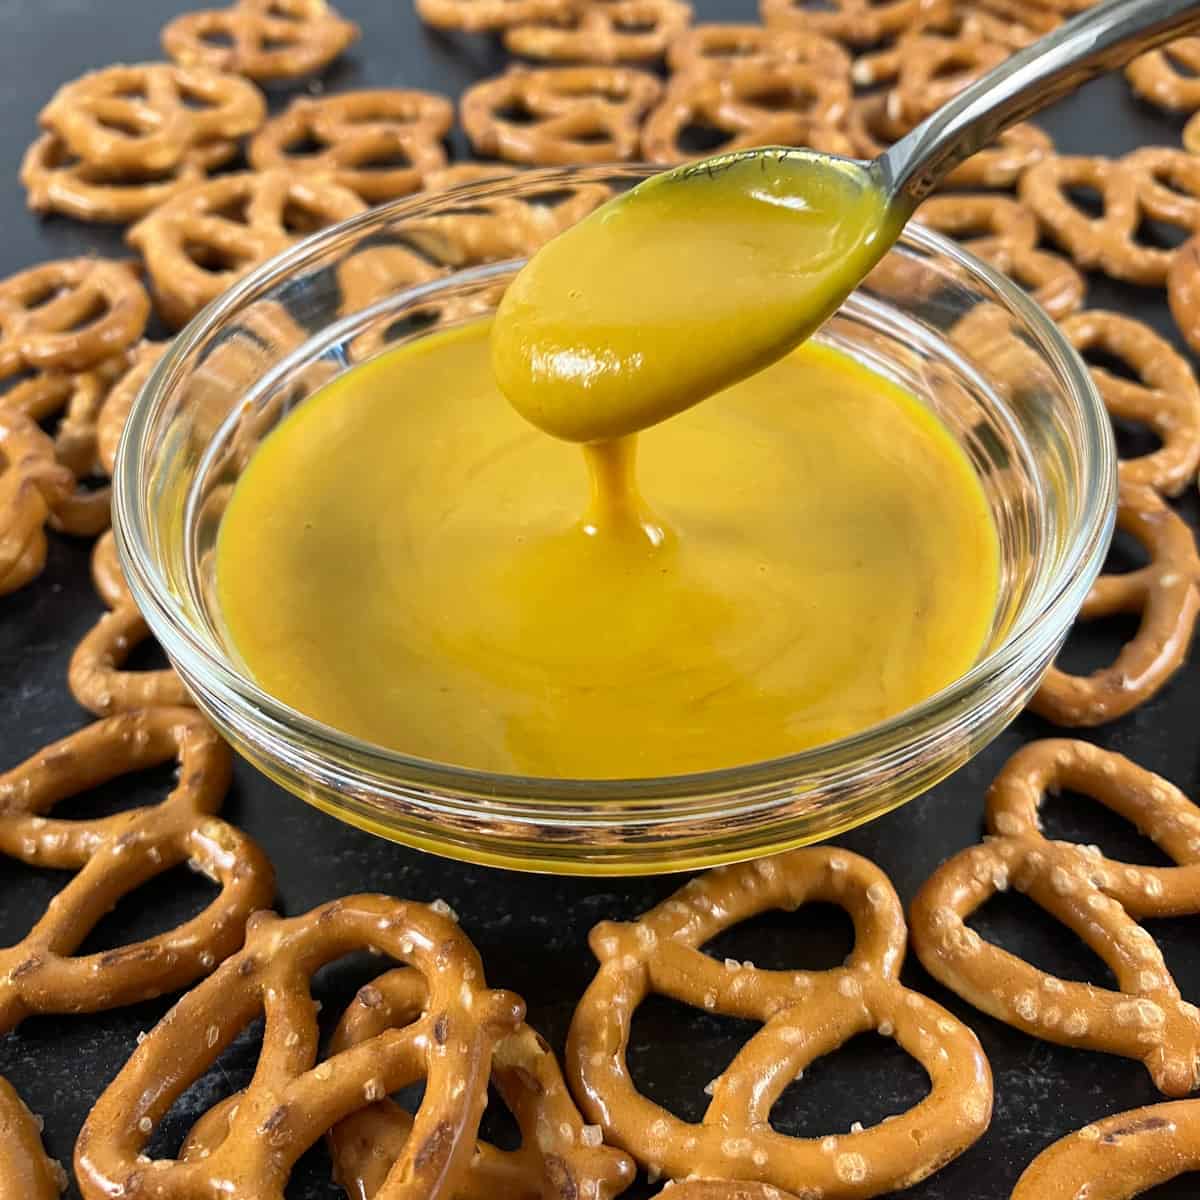 Spoon with Honey mustard dripping into a small glass bowl. Hard pretzels are surrounding the bowl.